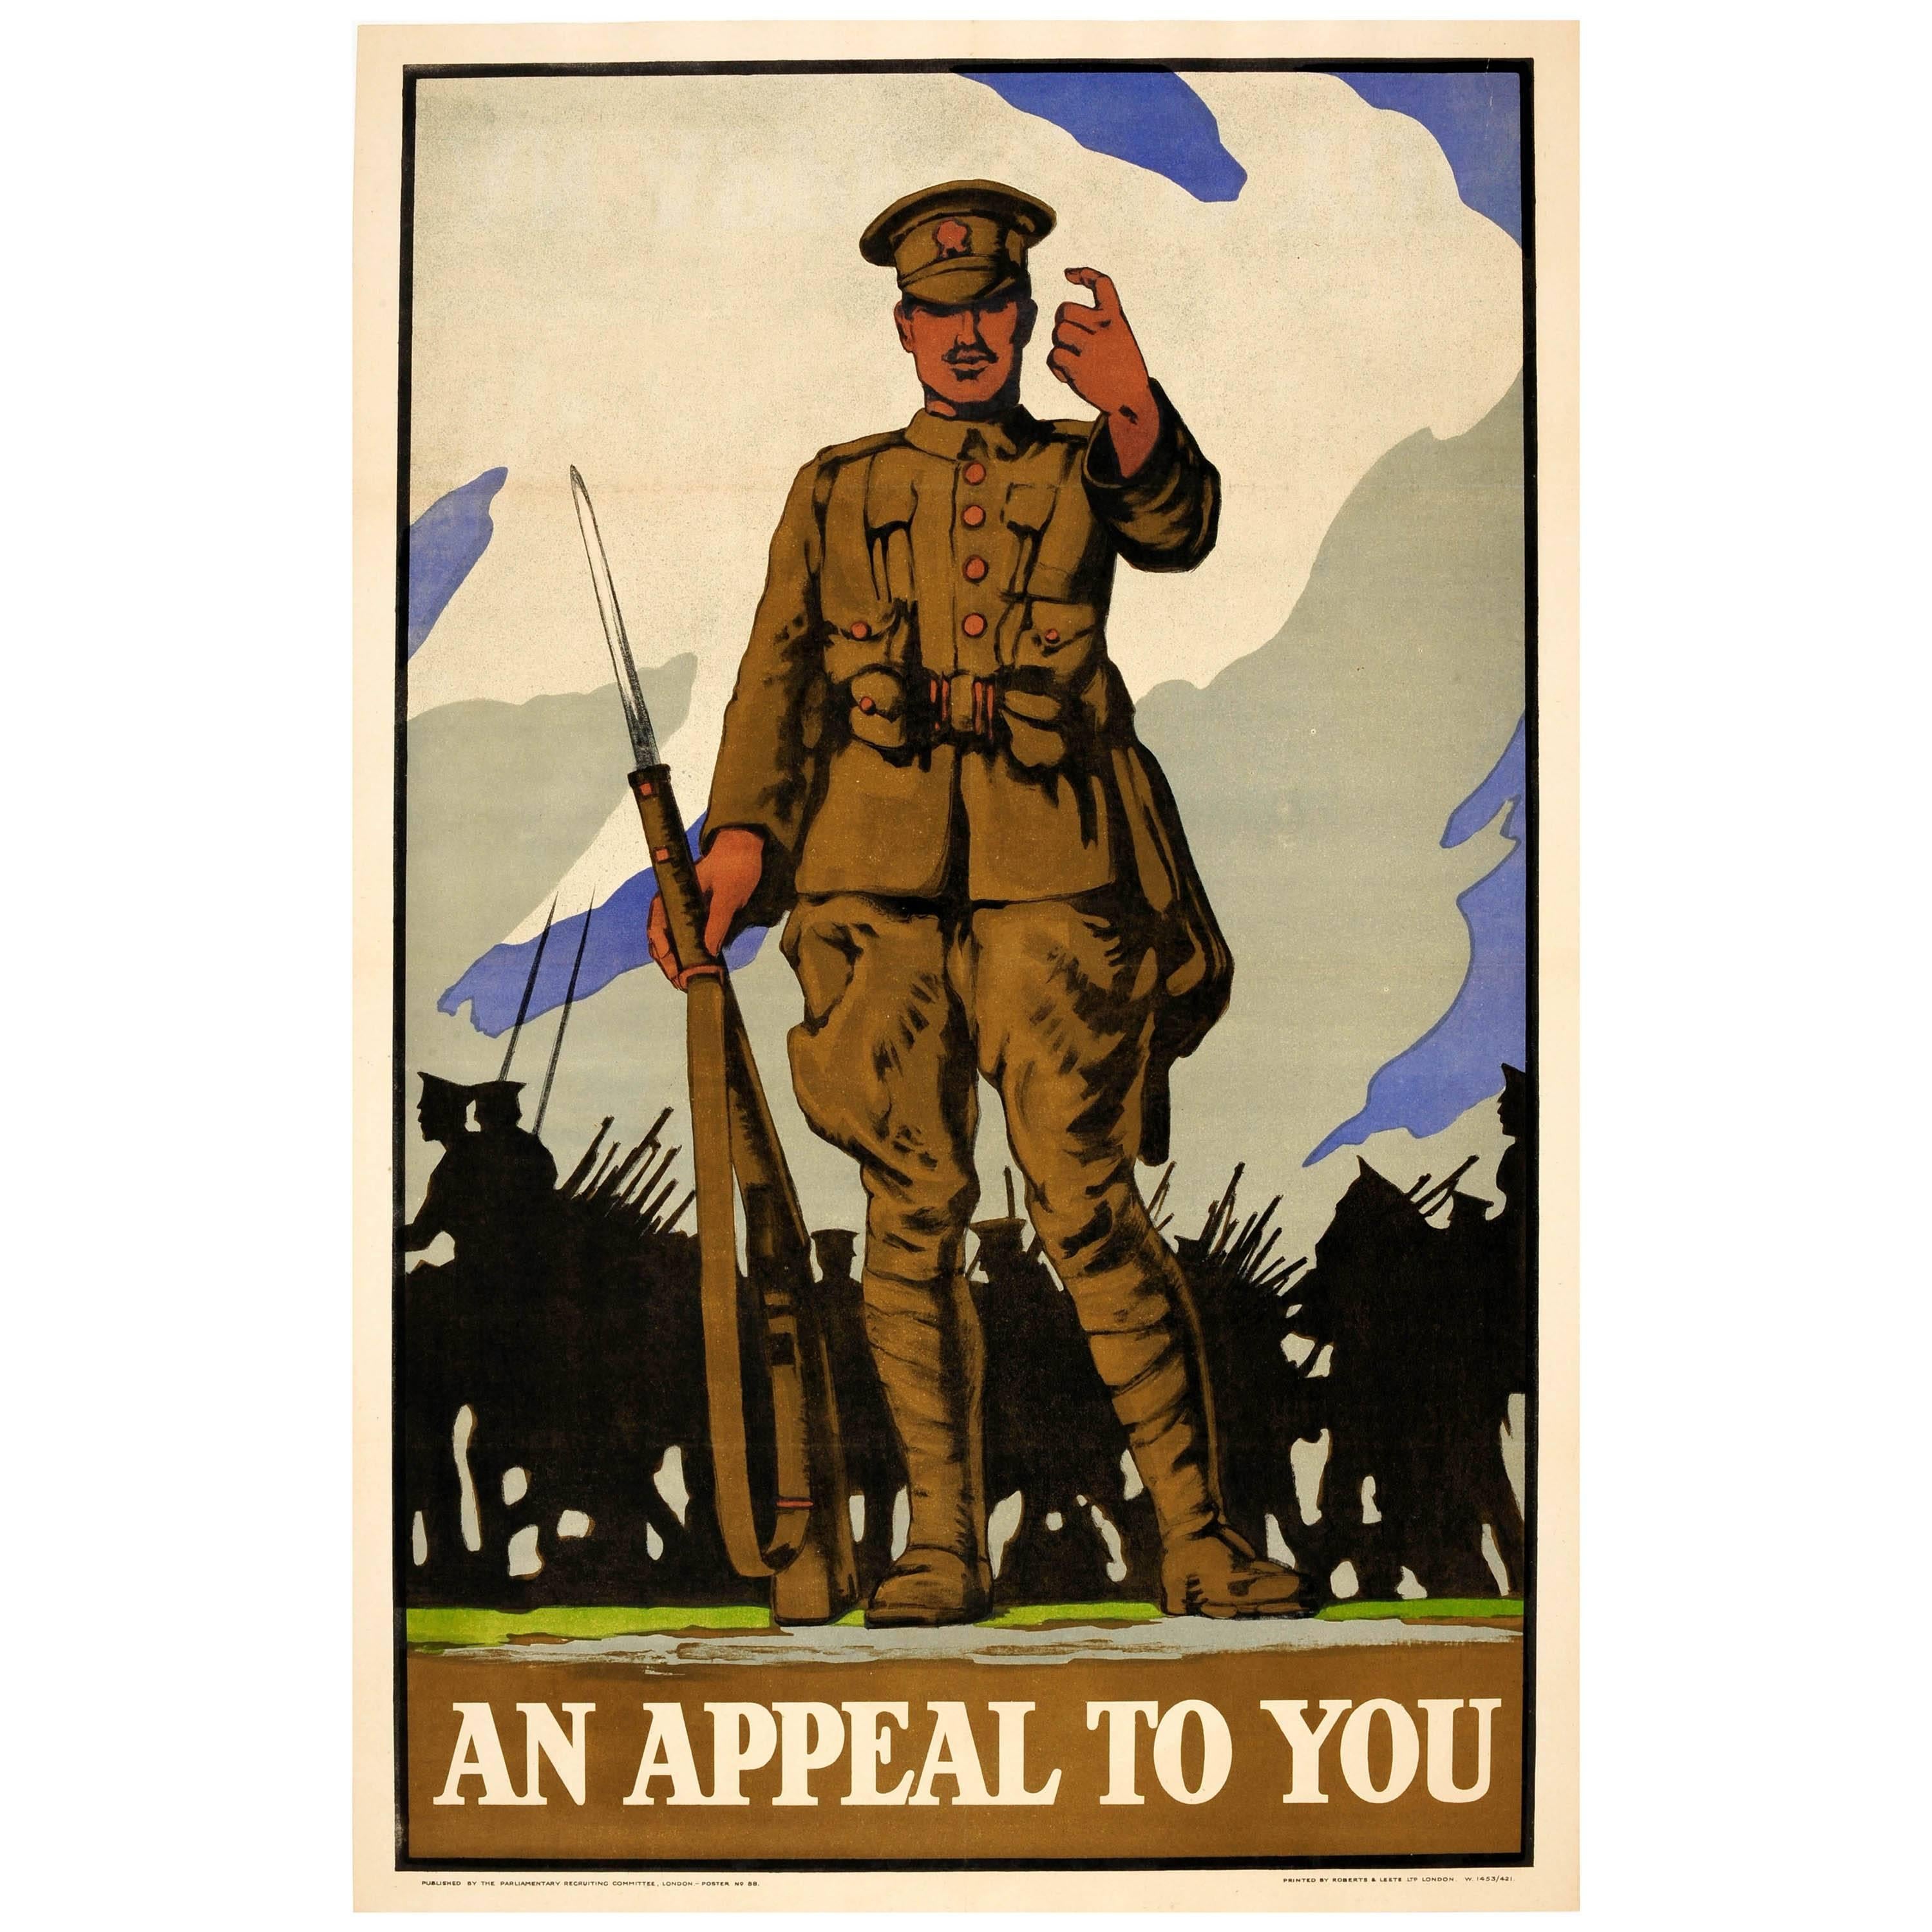 Original World War One Army Recruitment Poster - An Appeal To You - WWI Soldier